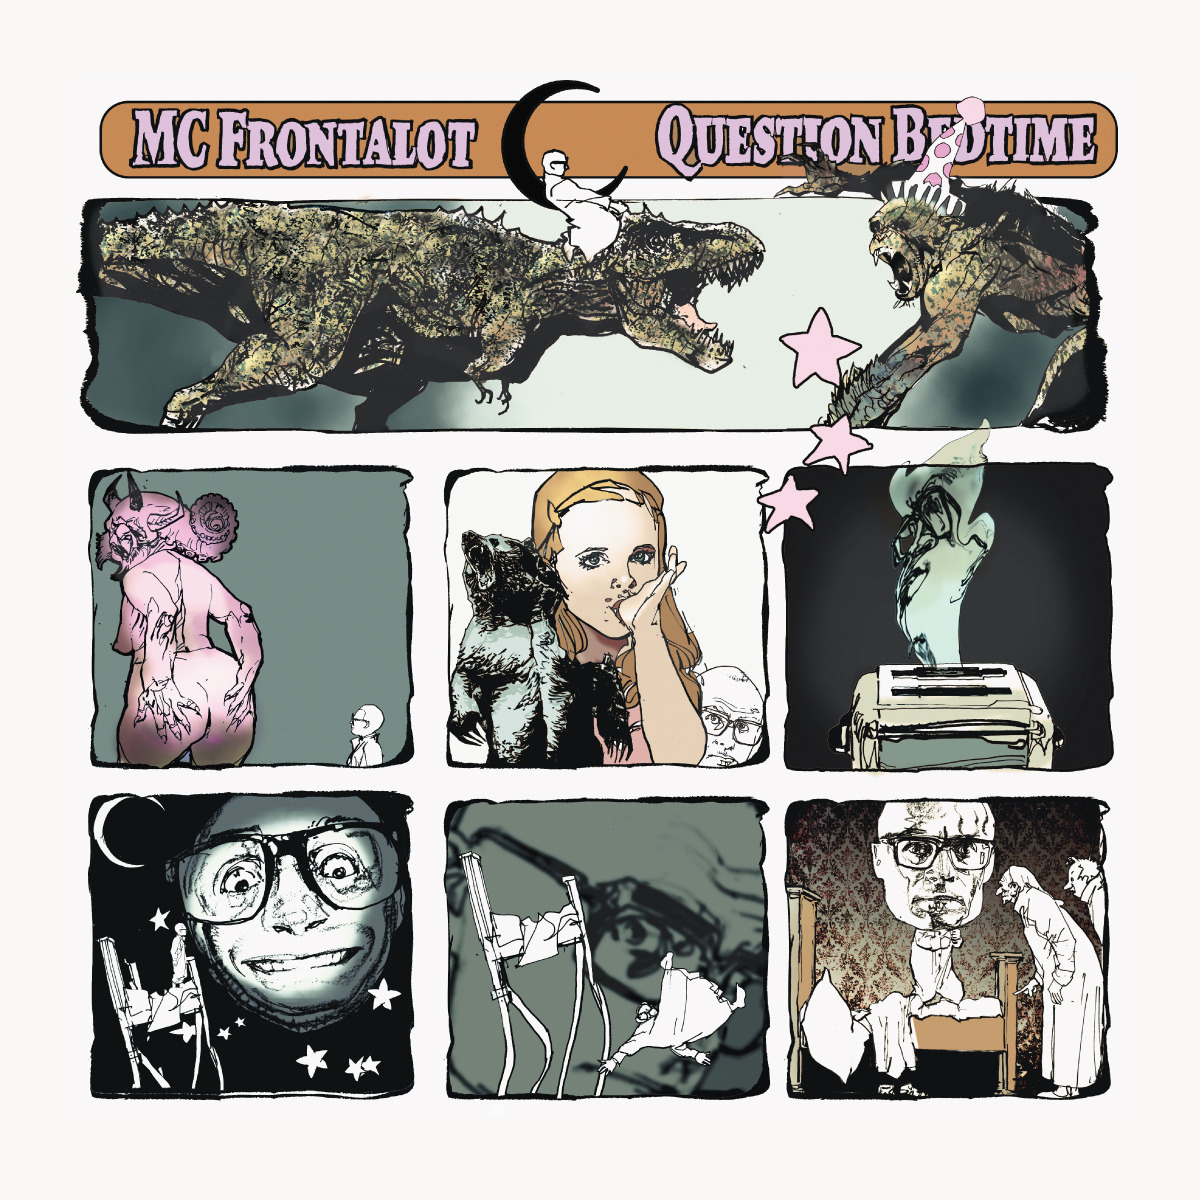 protofans:
“ protofans:
“ Just a reminder that although MC Frontalot’s Question Bedtime officially comes out on Tuesday, if you pre-order it at his site you can receive a digital copy of the album, right now. Which means that you could be hearing a...